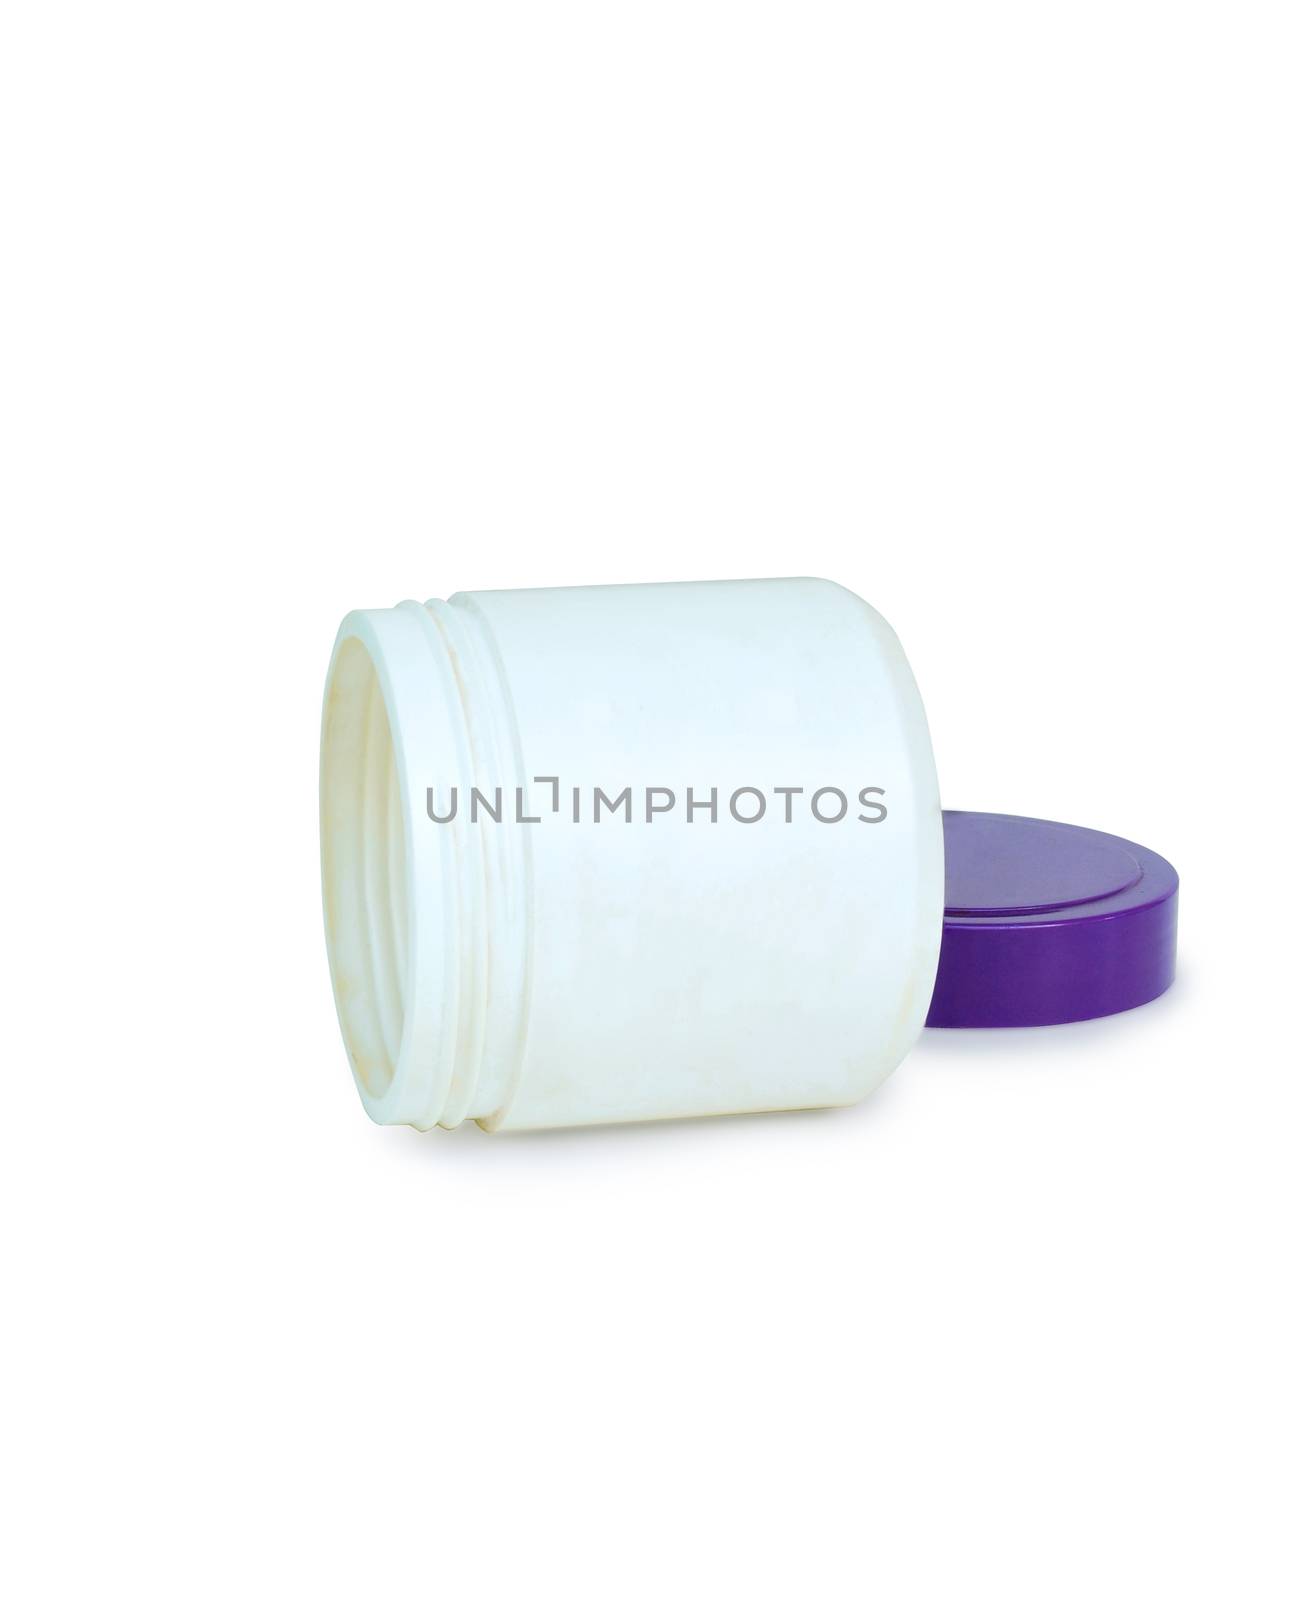 Treatment bottle on white background.With Clipping Path.